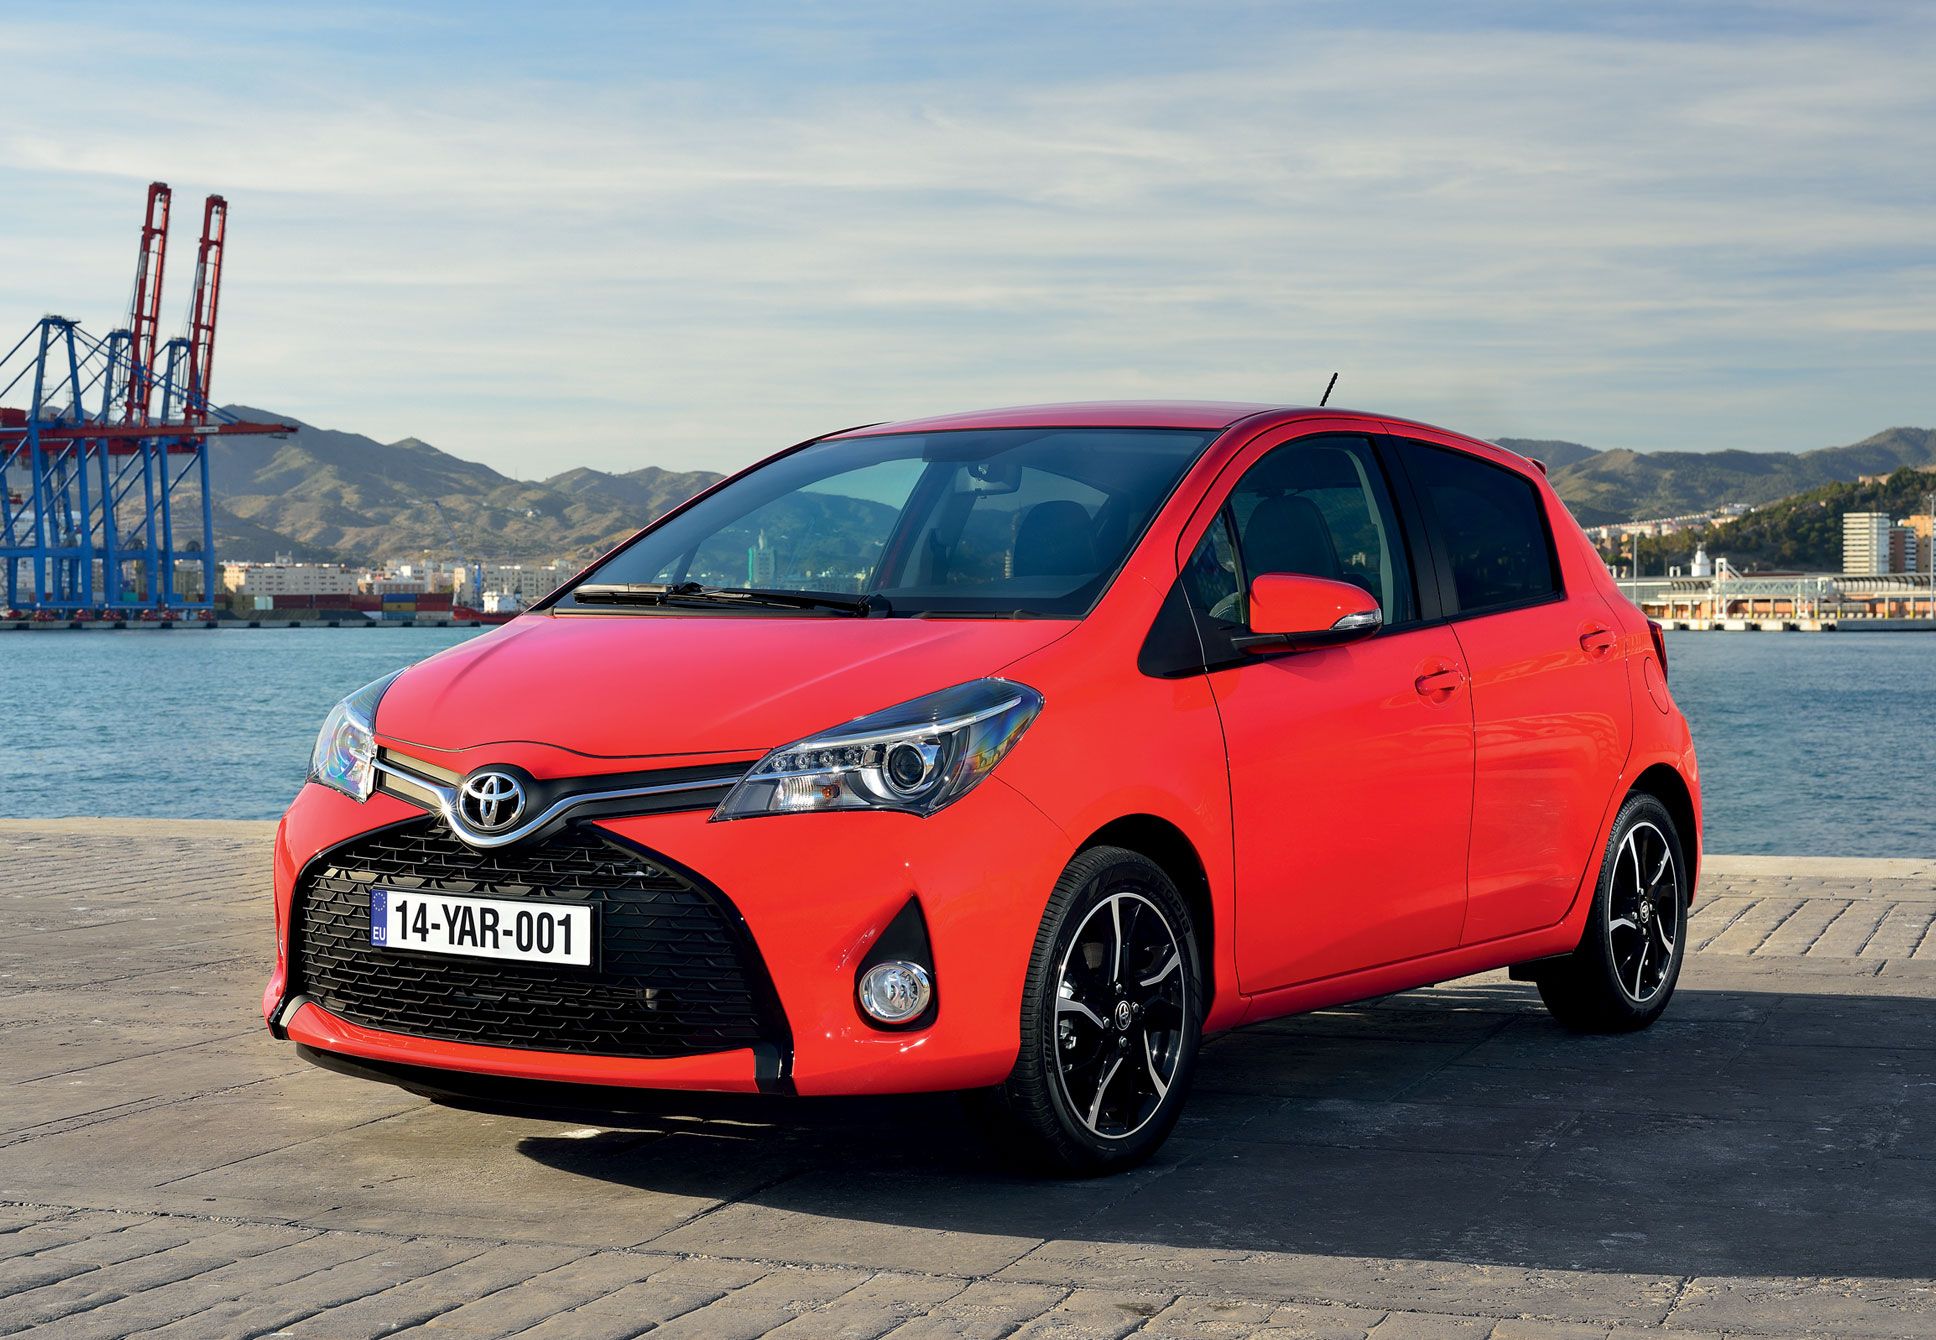 Toyota #Yaris #2014 #Summer #Car #Red | Yaris, Toyota, New cars for sale